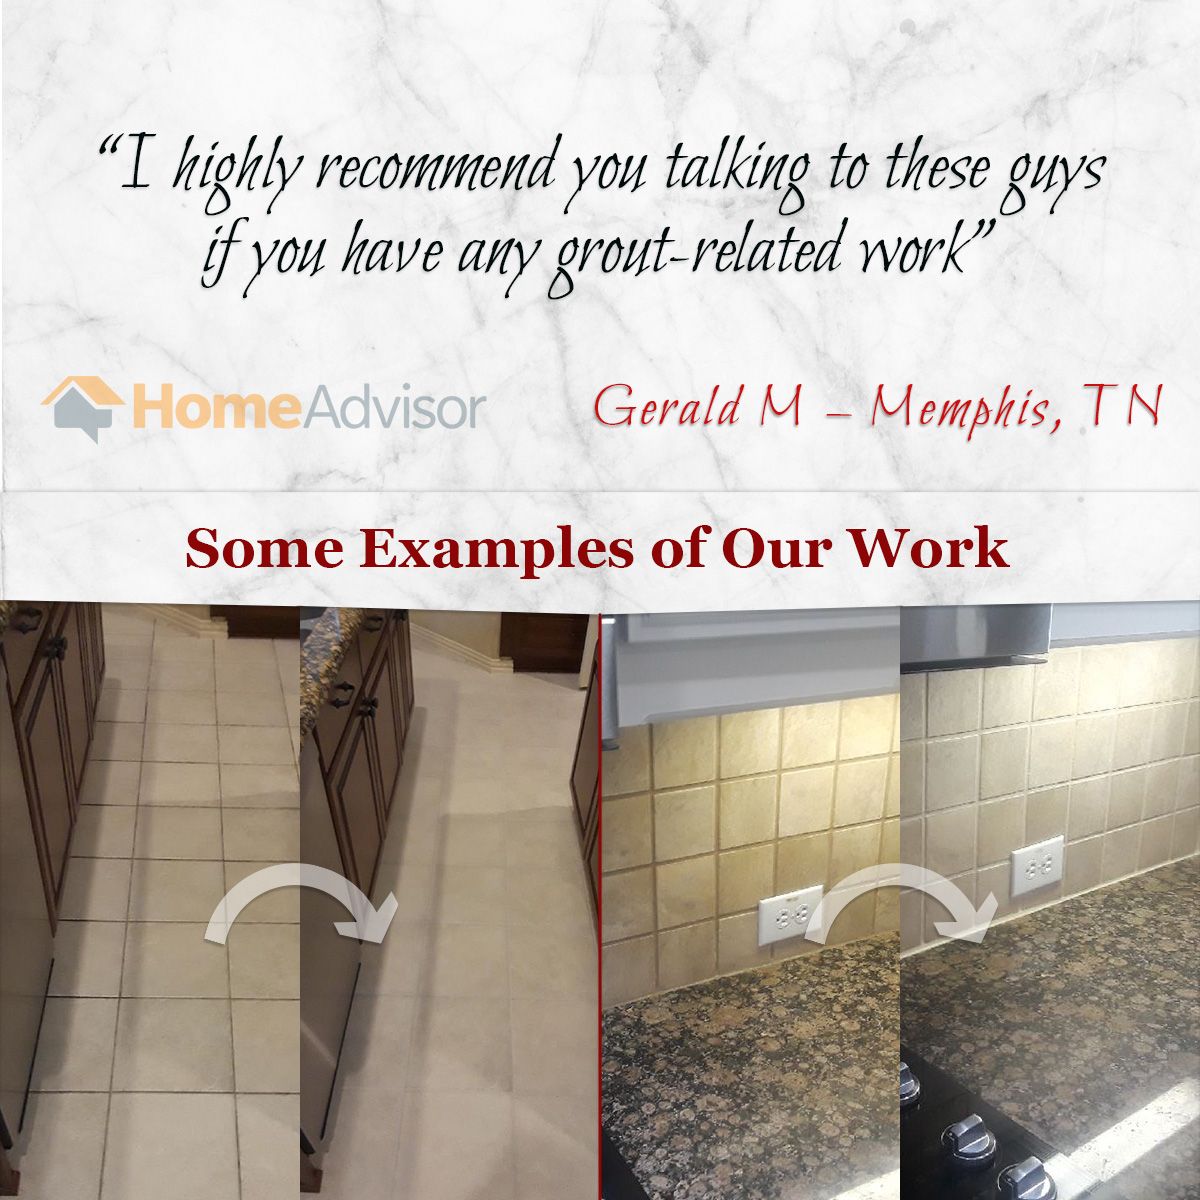 I highly recommend you talking to these guys if you have any grout-related work